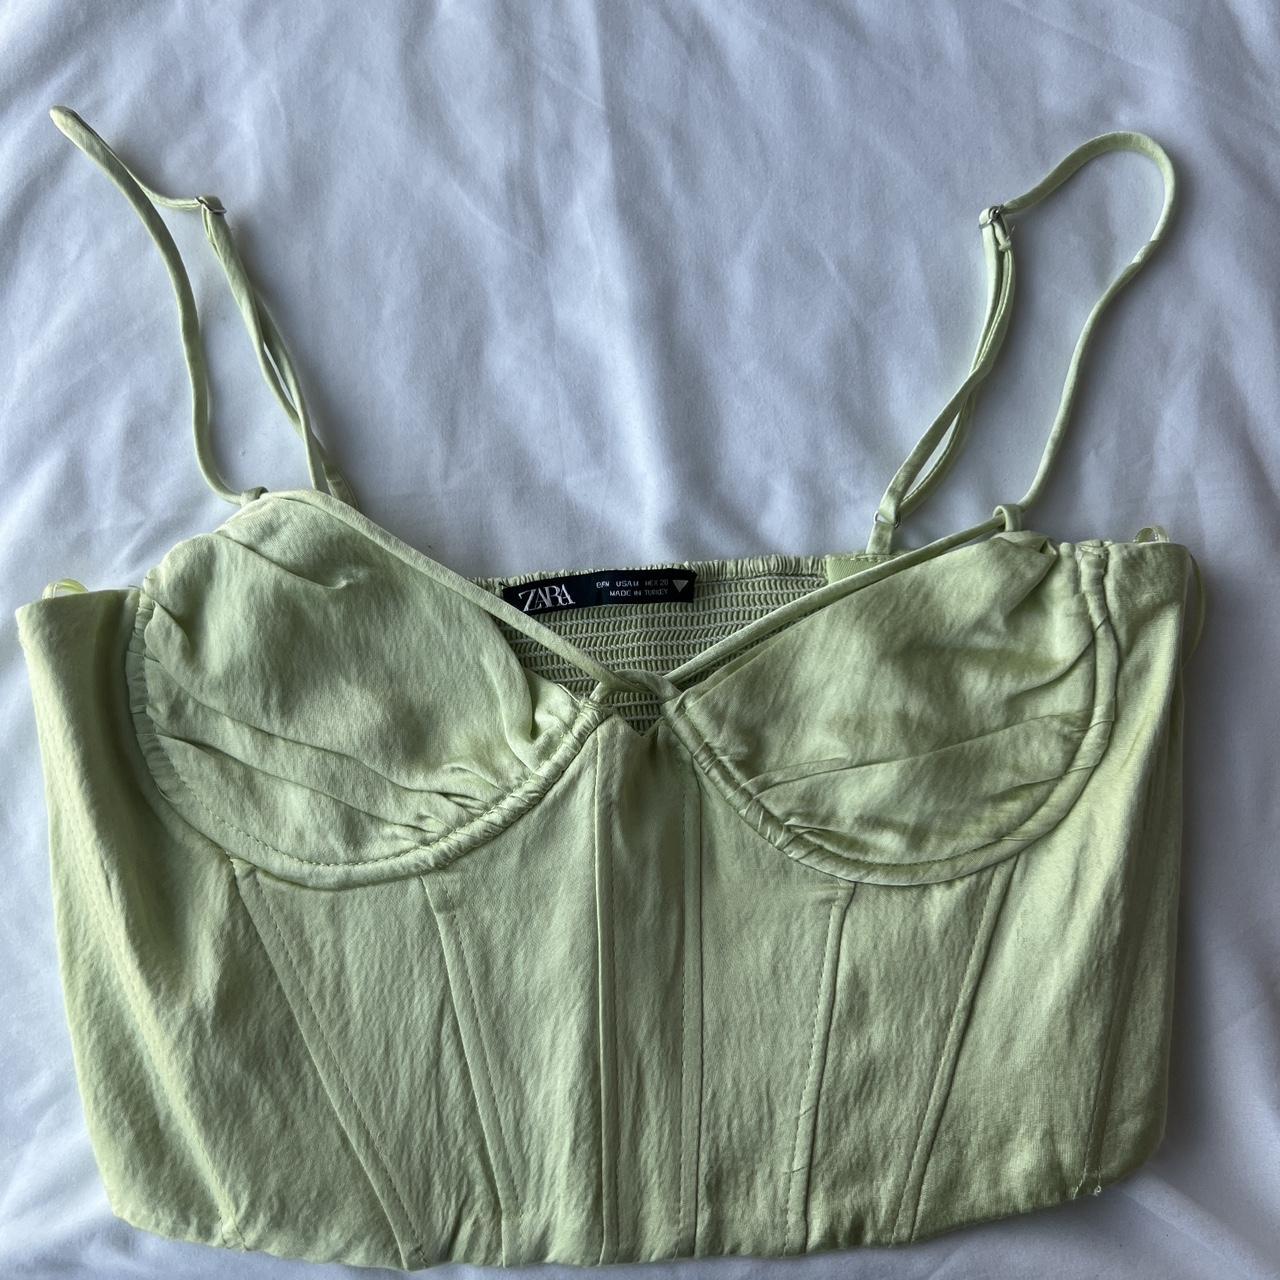 ZARA Green Floral Corset Top Size XS - $22 New With Tags - From Celina